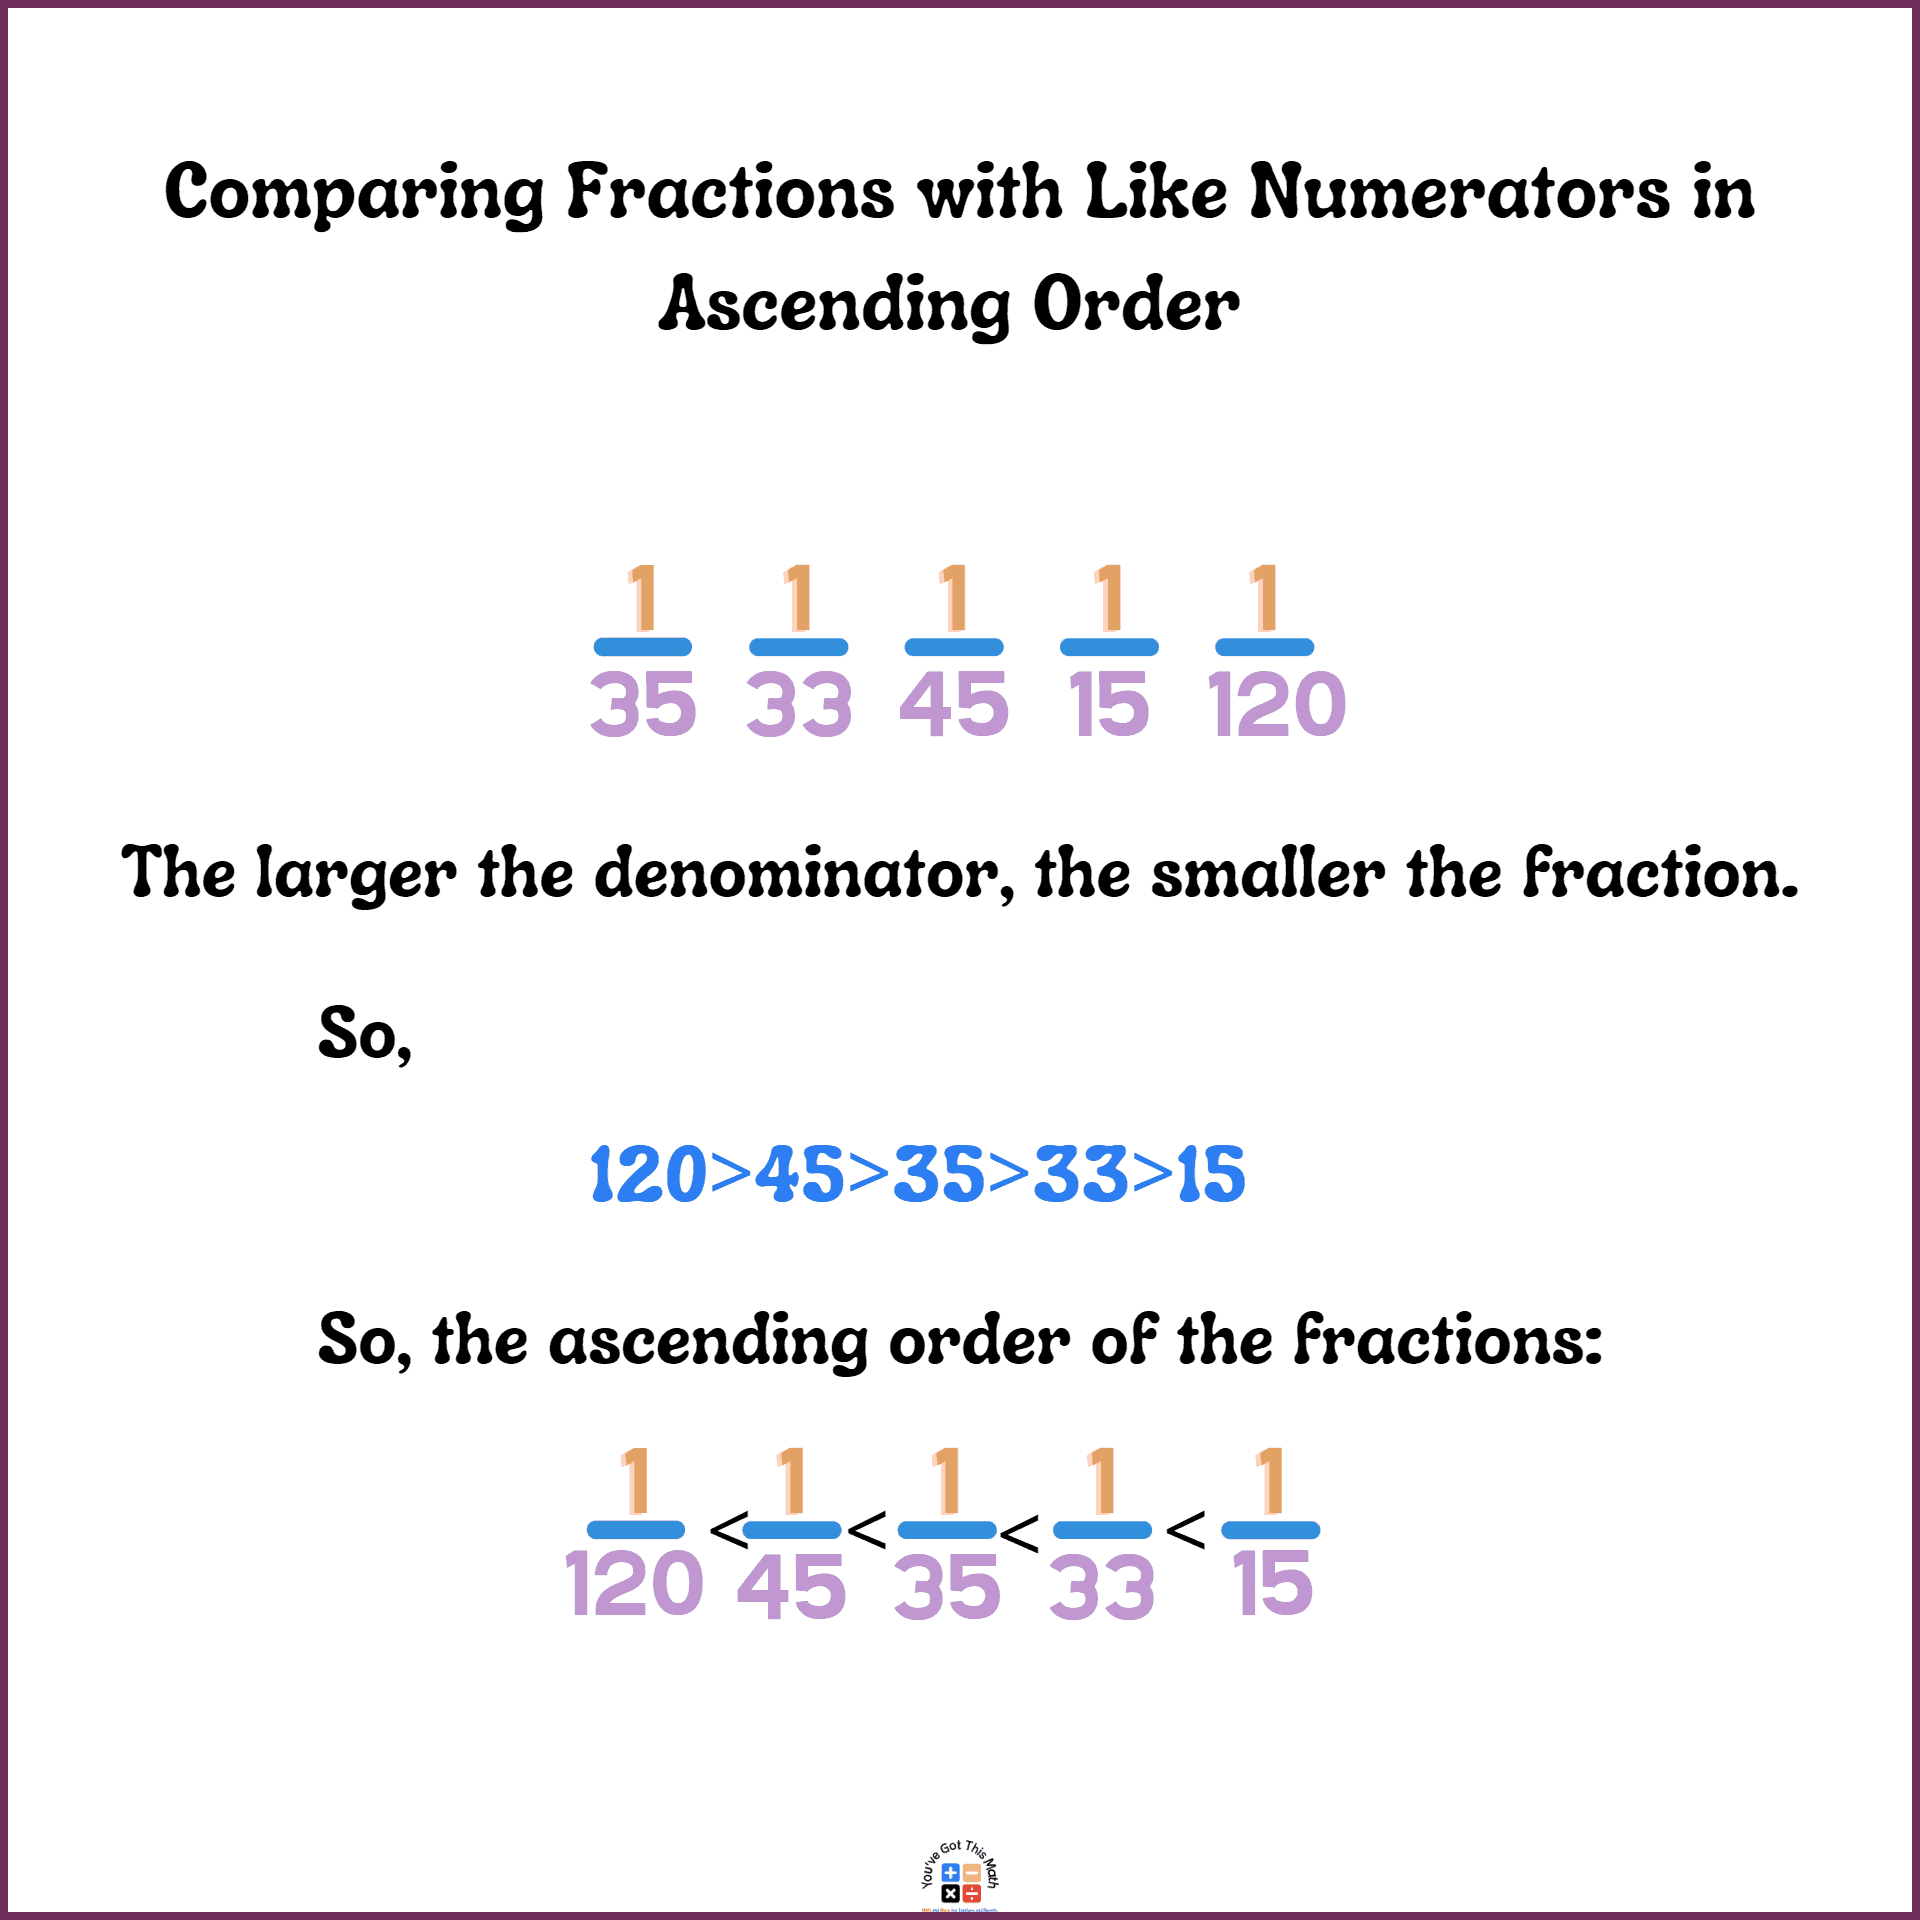 Compare fractions with the same numerators in ascending order